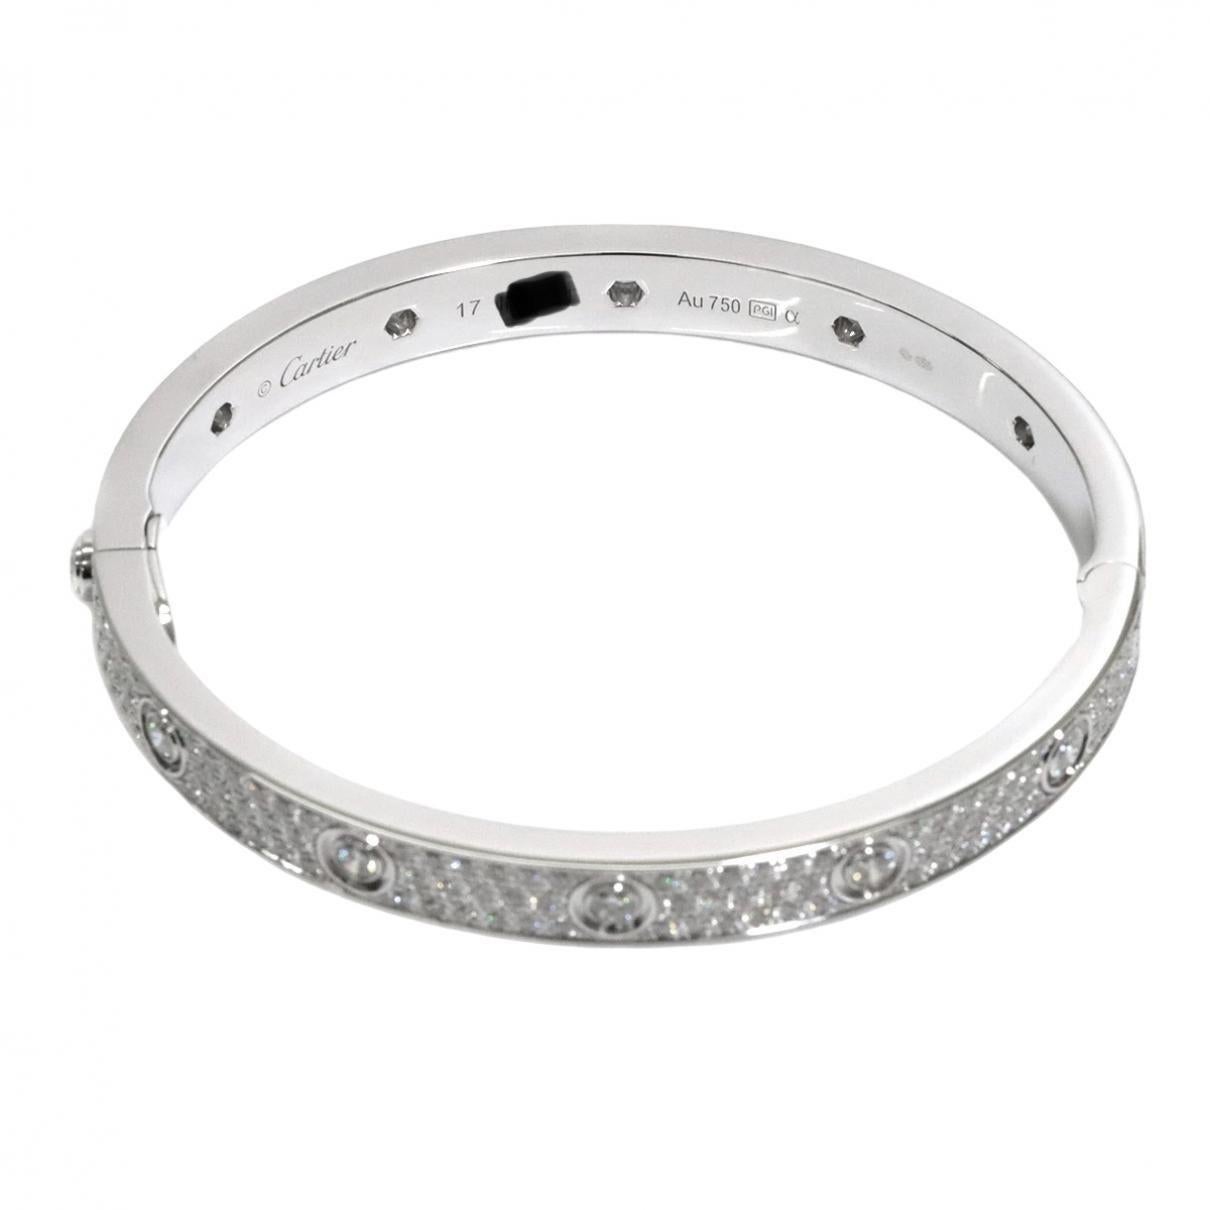 Contemporary Cartier LOVE Bracelet in 18k white gold and 3.70ct diamonds with box & papers